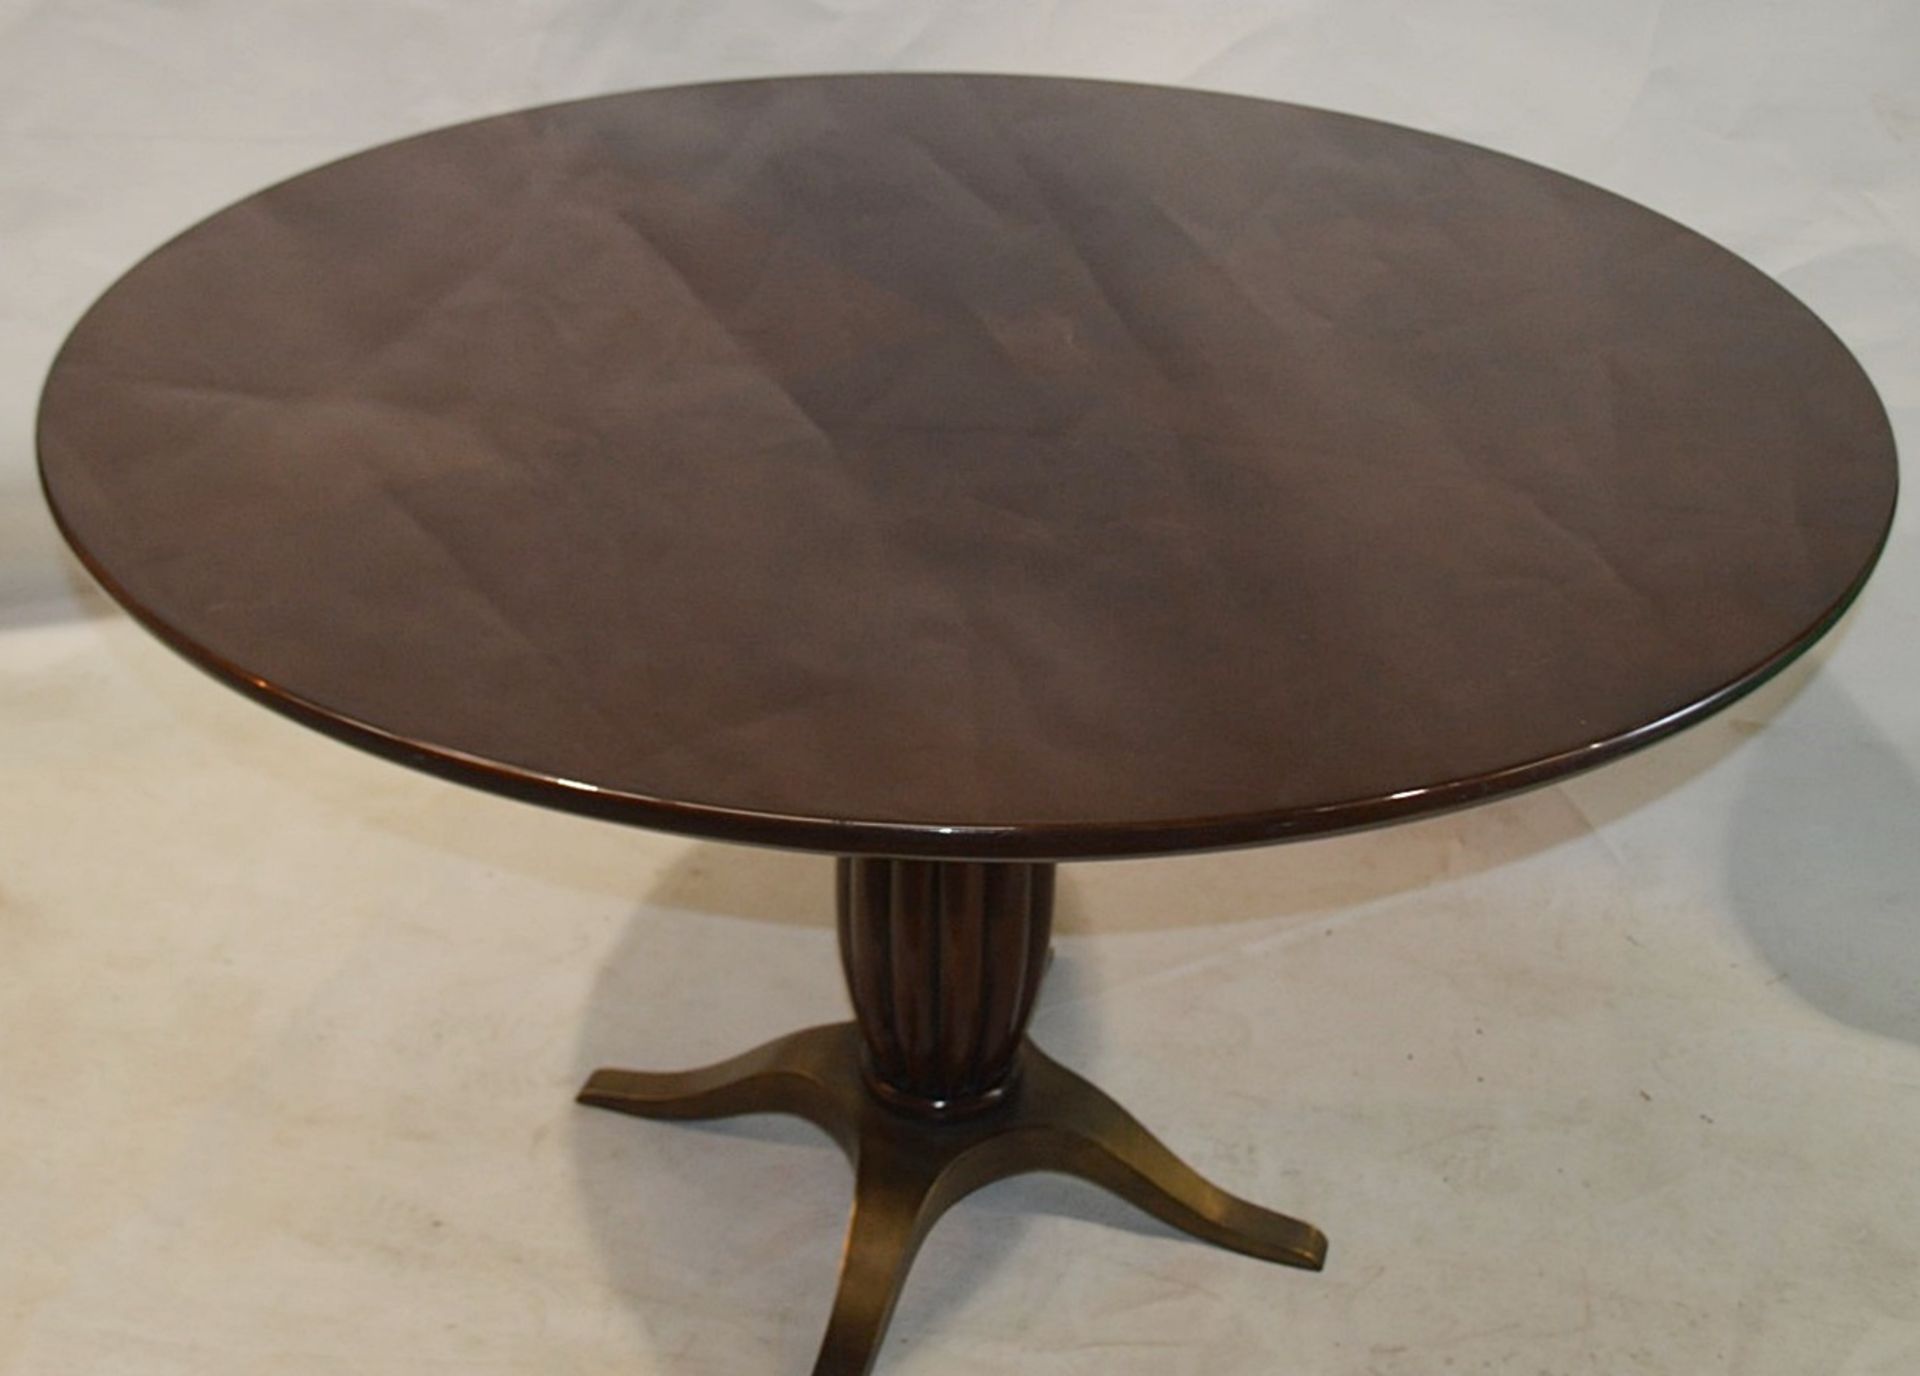 1 x Christopher Guy 'Toulouse' Round Georgian-Style Restaurant Dining Table - Original RRP £4,600.00 - Image 7 of 9